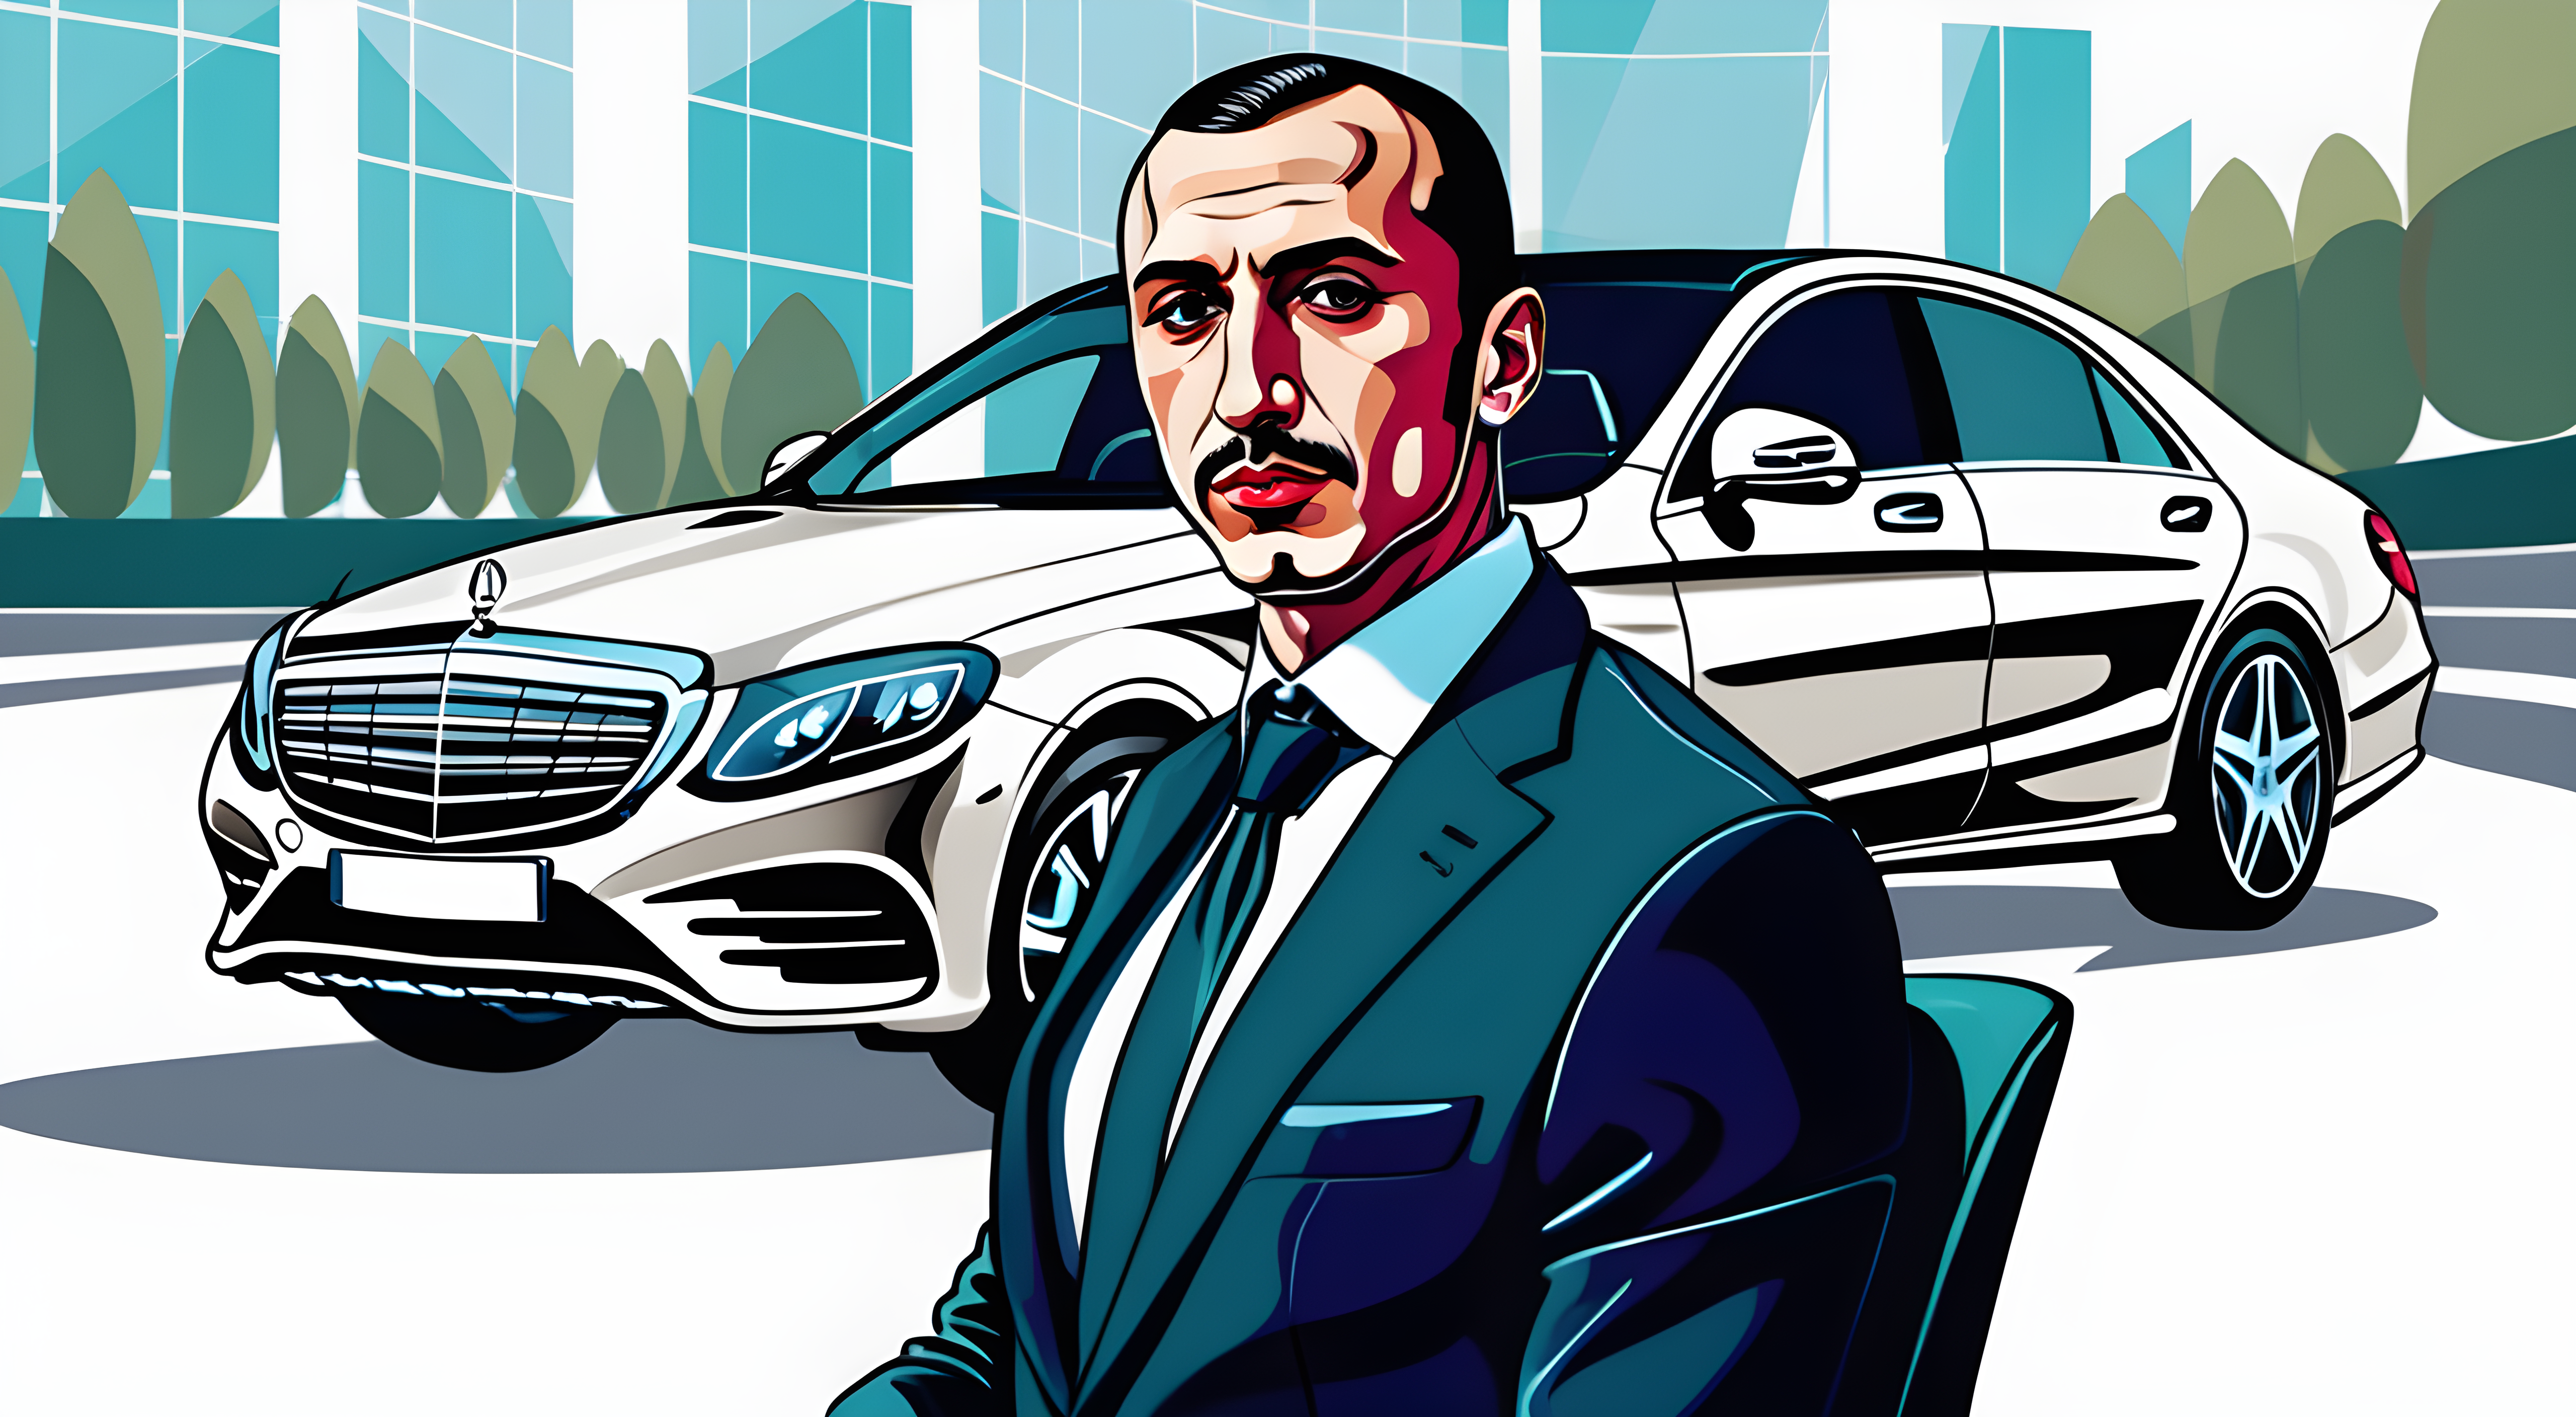 media-2d-illustration-of-azerbaijani-35-years-old-businessman-sitting-in-s-class-mercedes-572603299